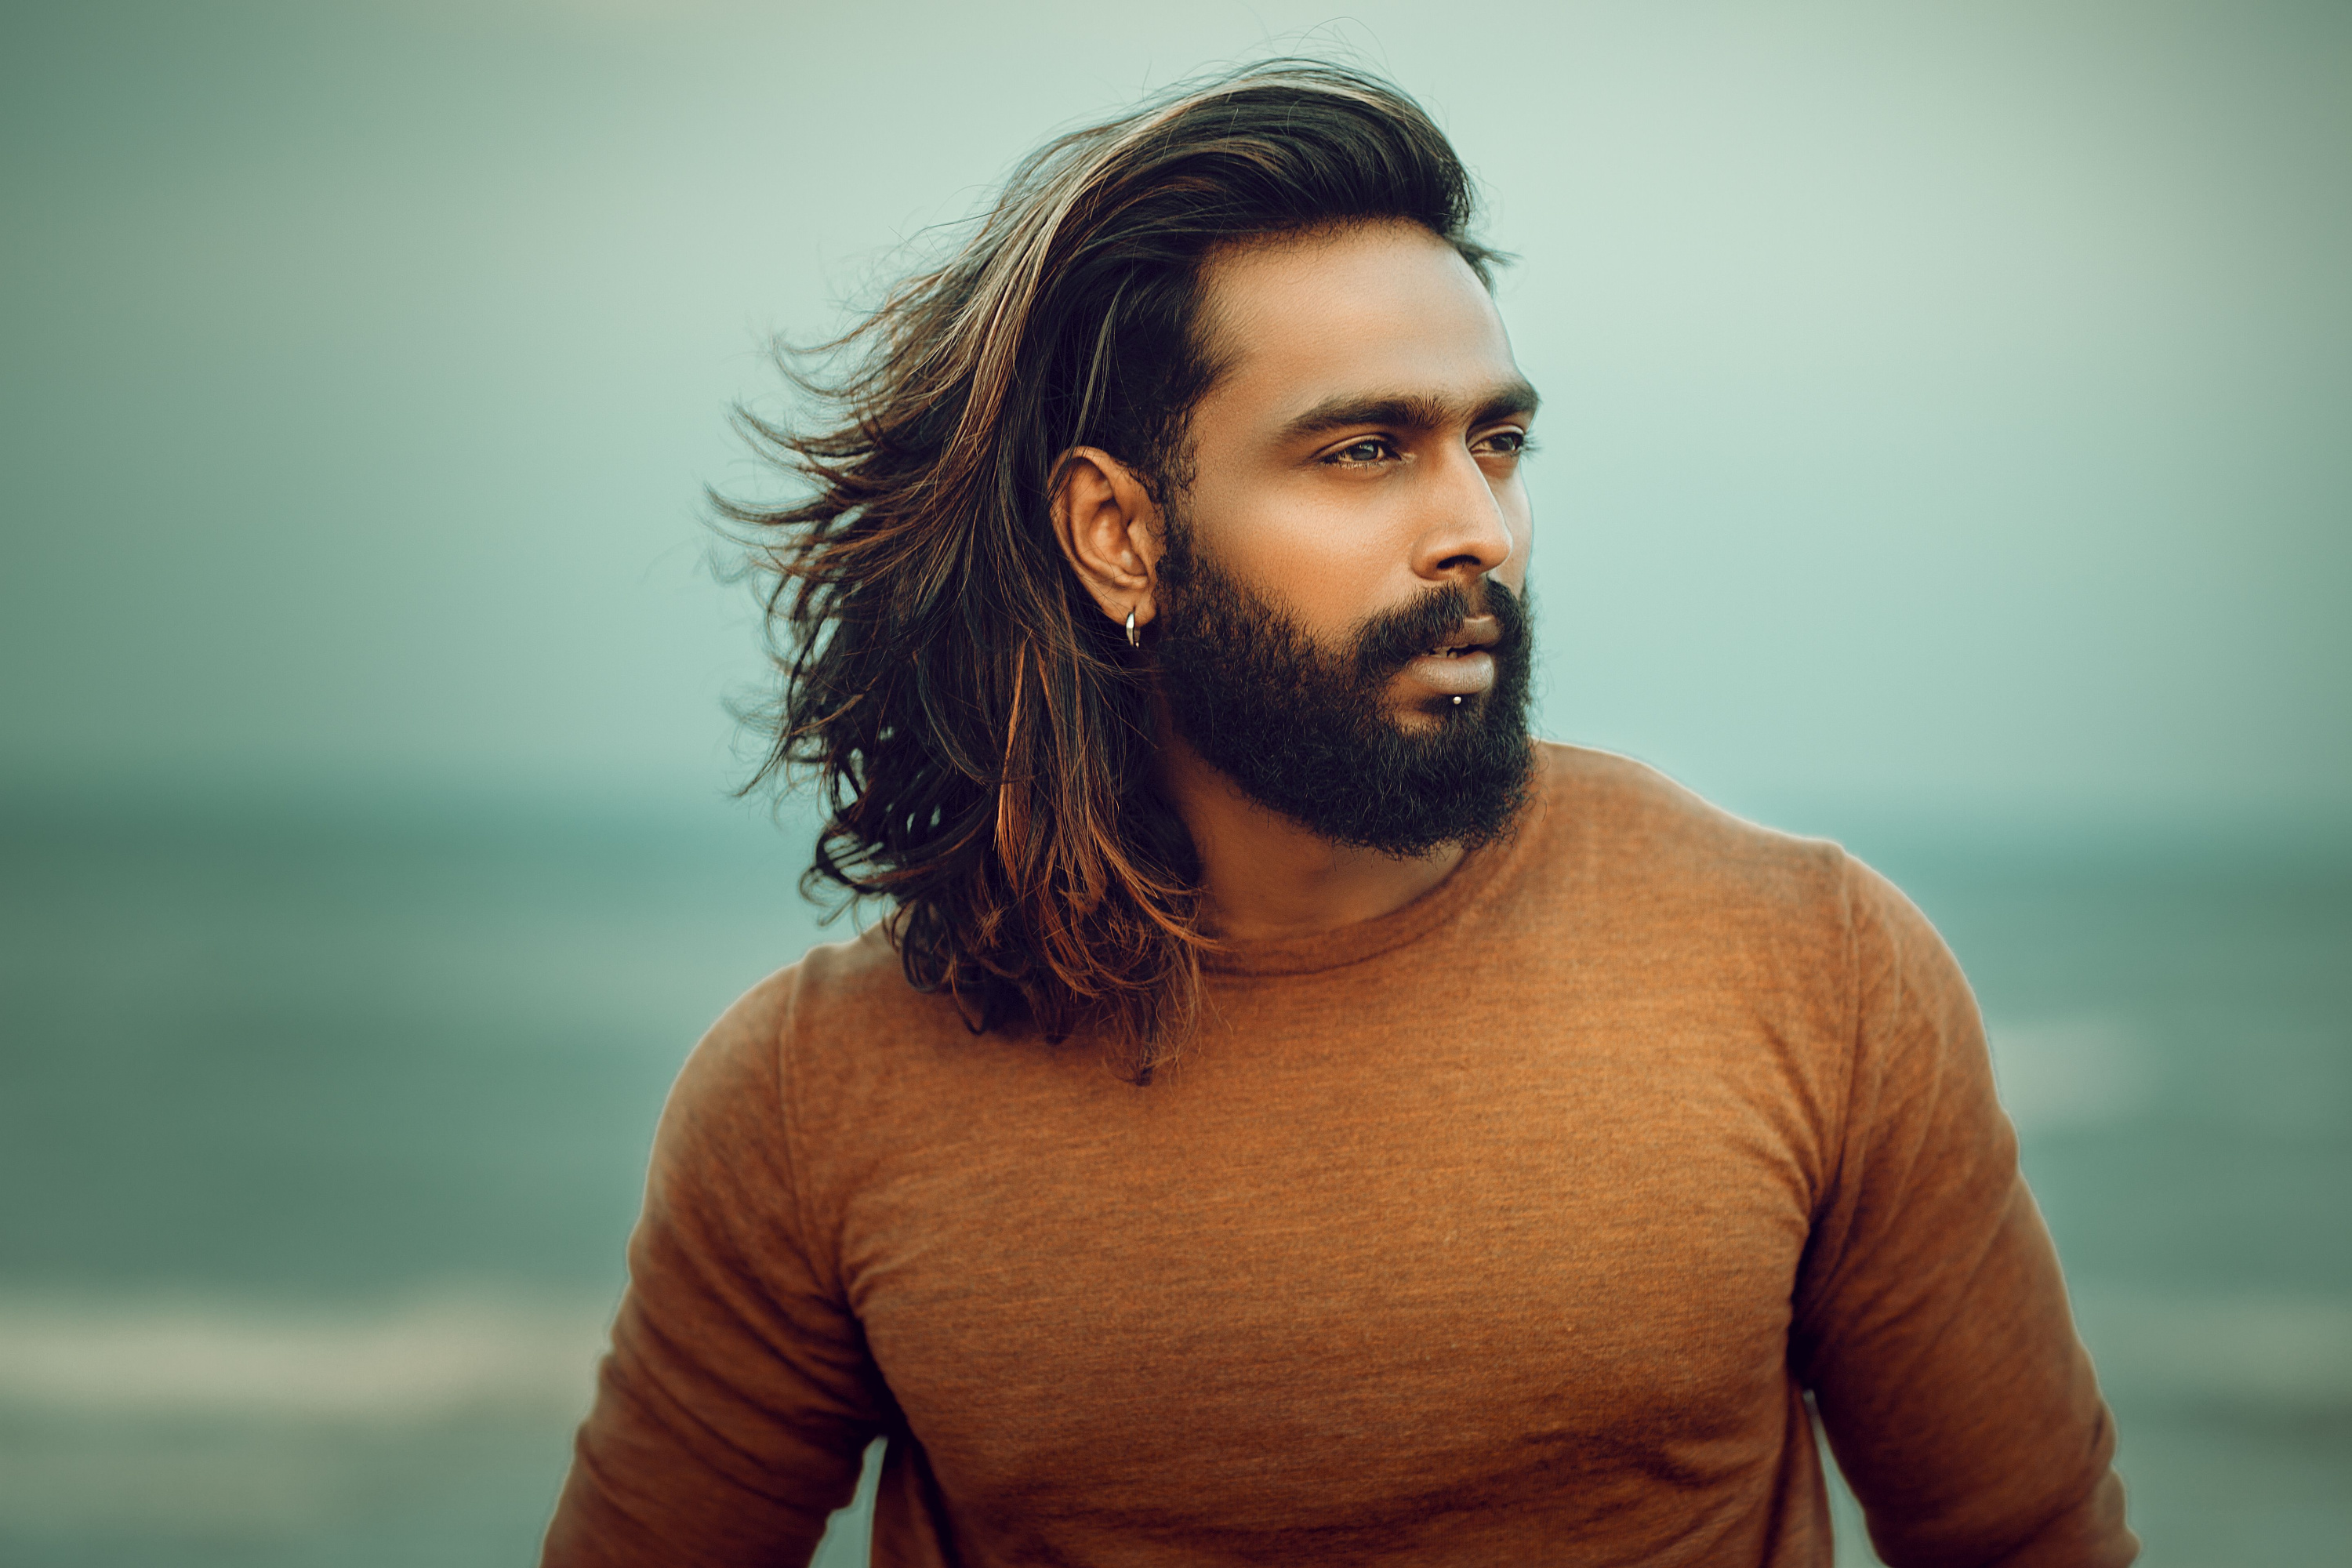 What are some good hairstyles for males with thick long hair? - Quora